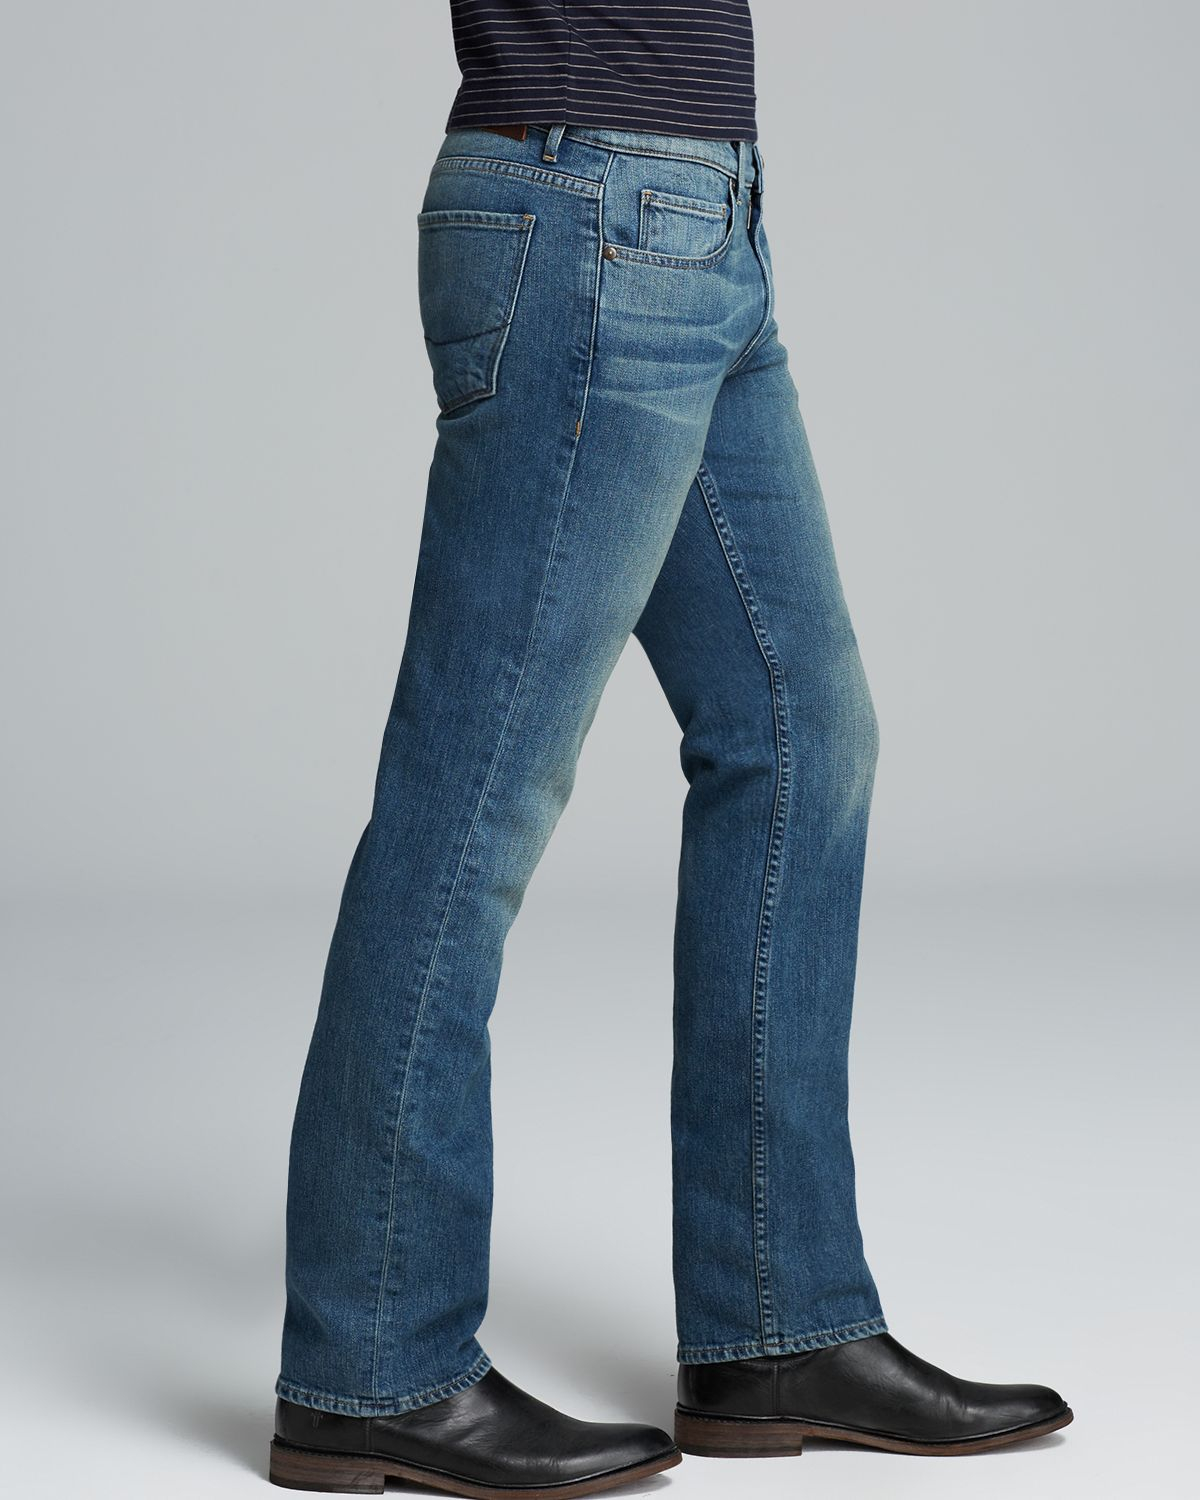 Paige Paige Premium Denim Jeans - Normandie Straight Fit In Poster in ...